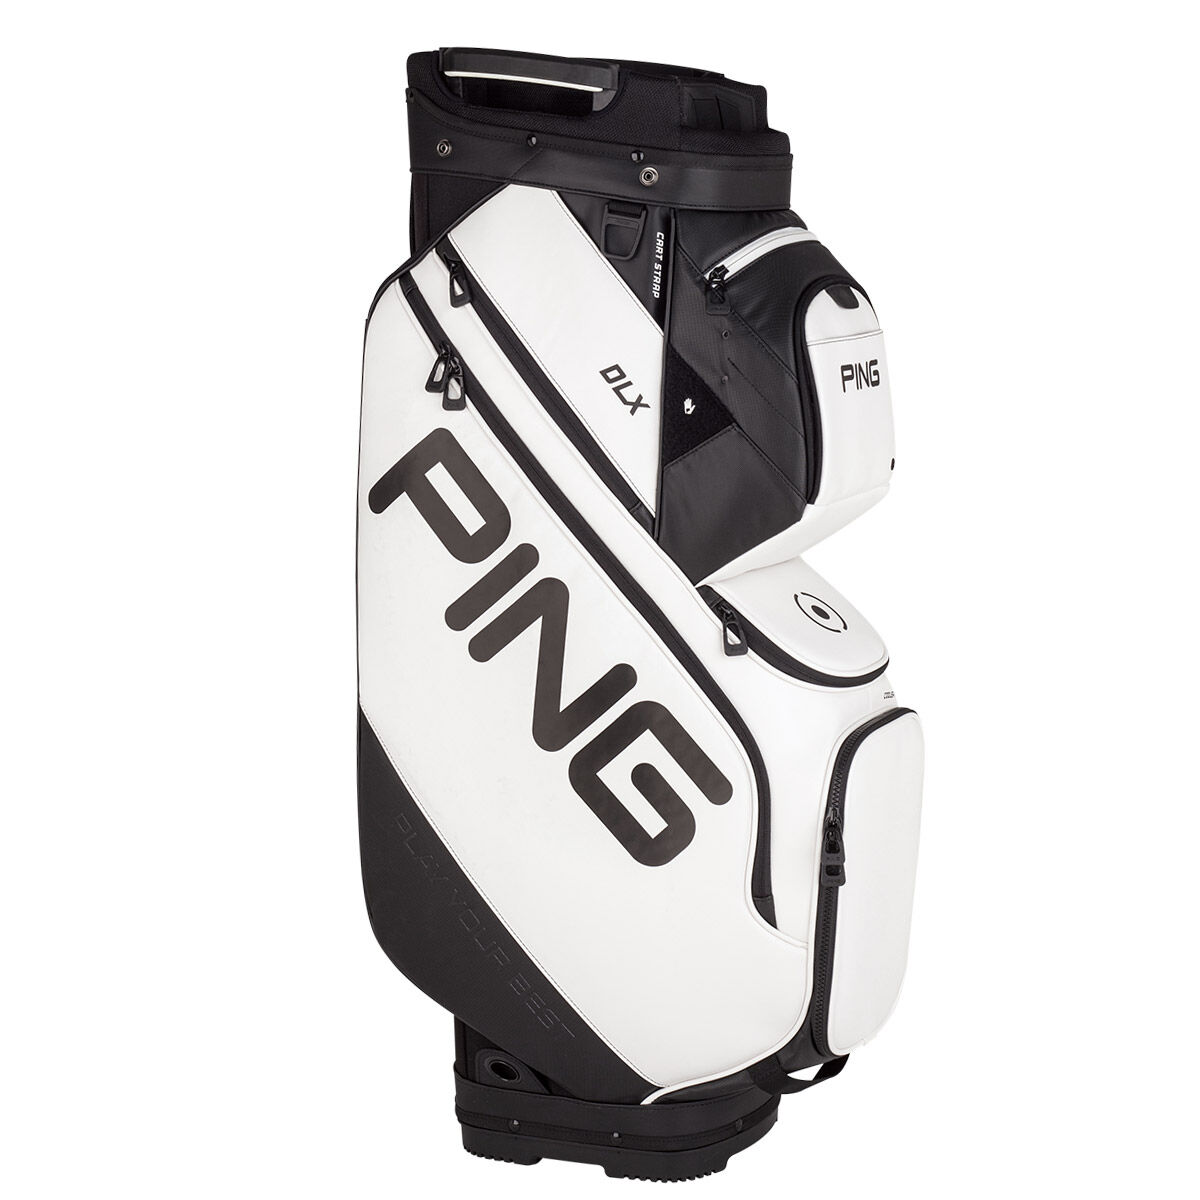 Ping White DLX Golf Cart Bag, Size: One Size | American Golf von Ping